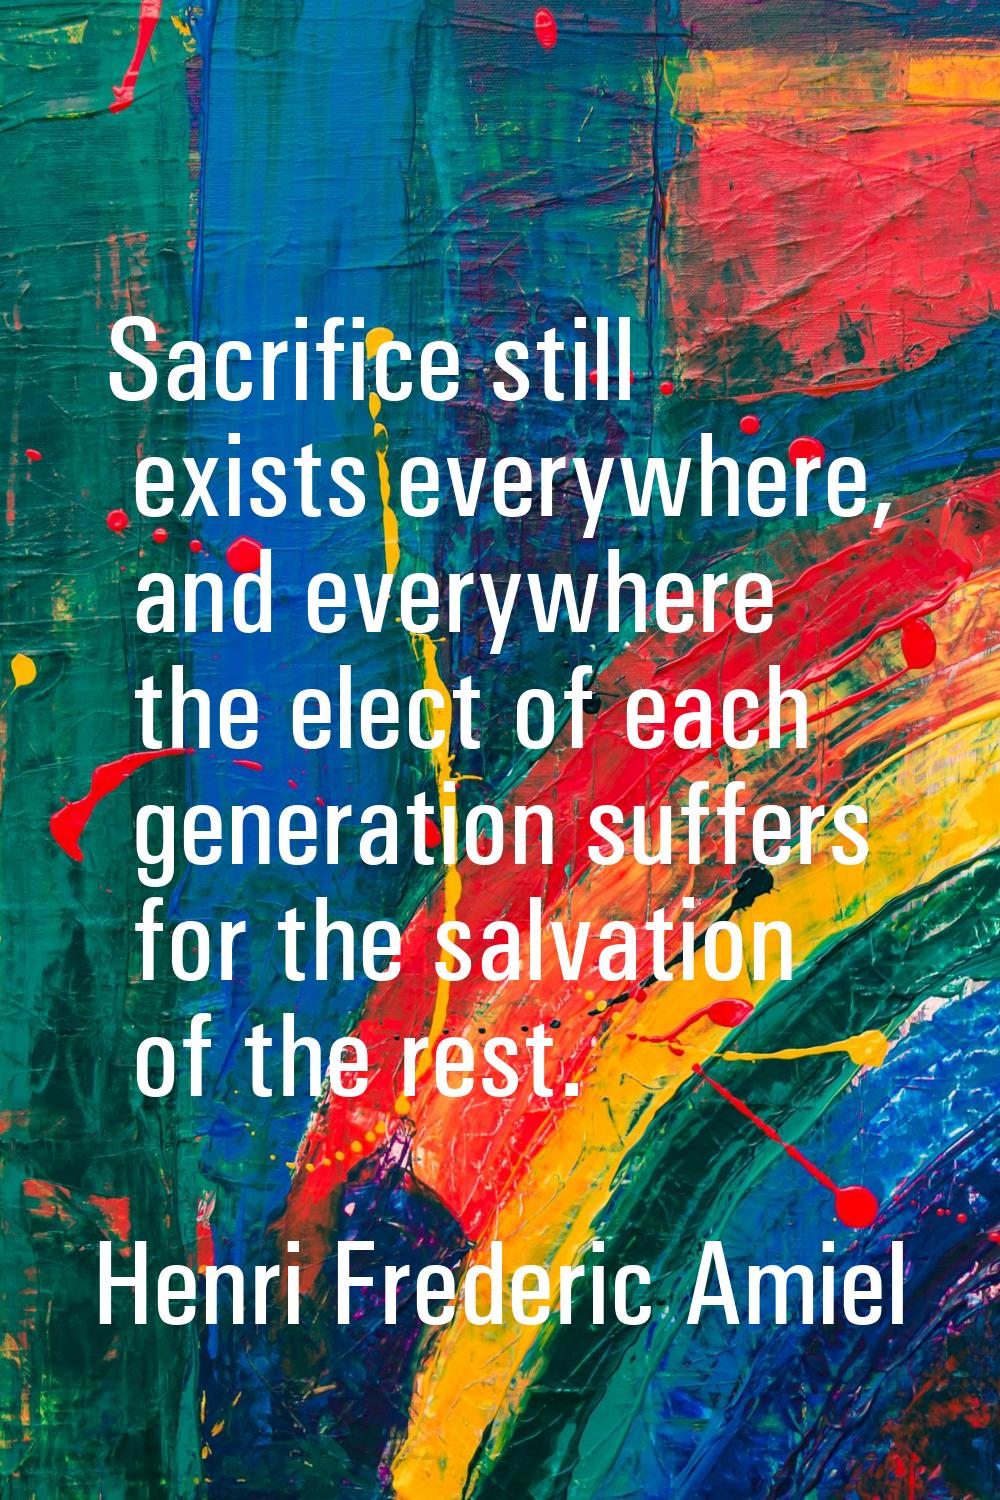 Sacrifice still exists everywhere, and everywhere the elect of each generation suffers for the salv